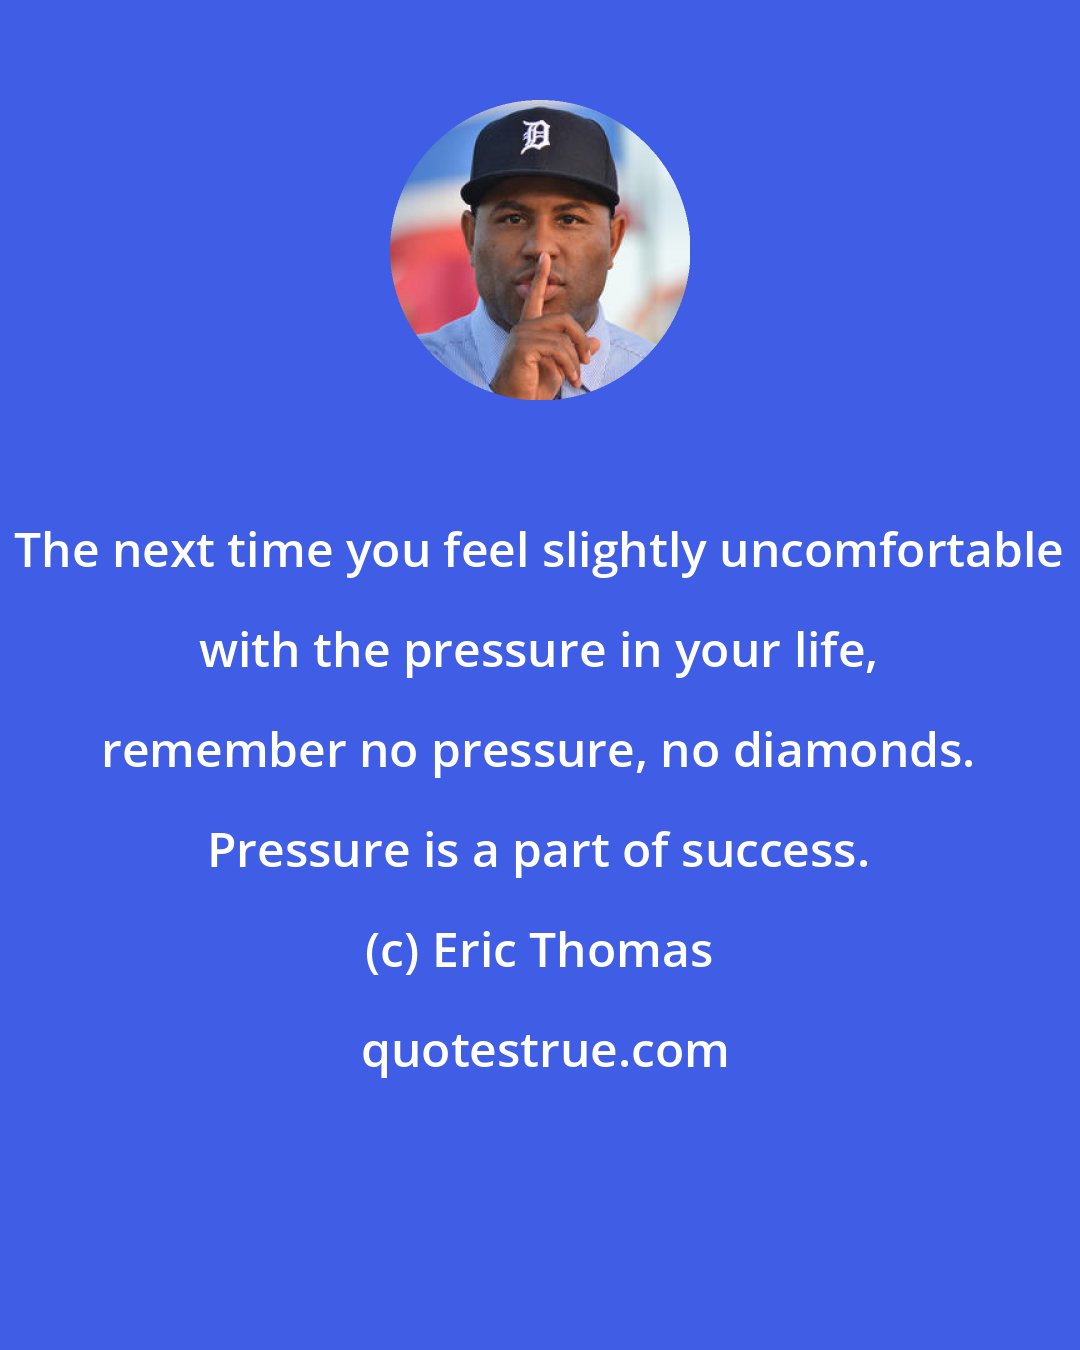 Eric Thomas: The next time you feel slightly uncomfortable with the pressure in your life, remember no pressure, no diamonds. Pressure is a part of success.